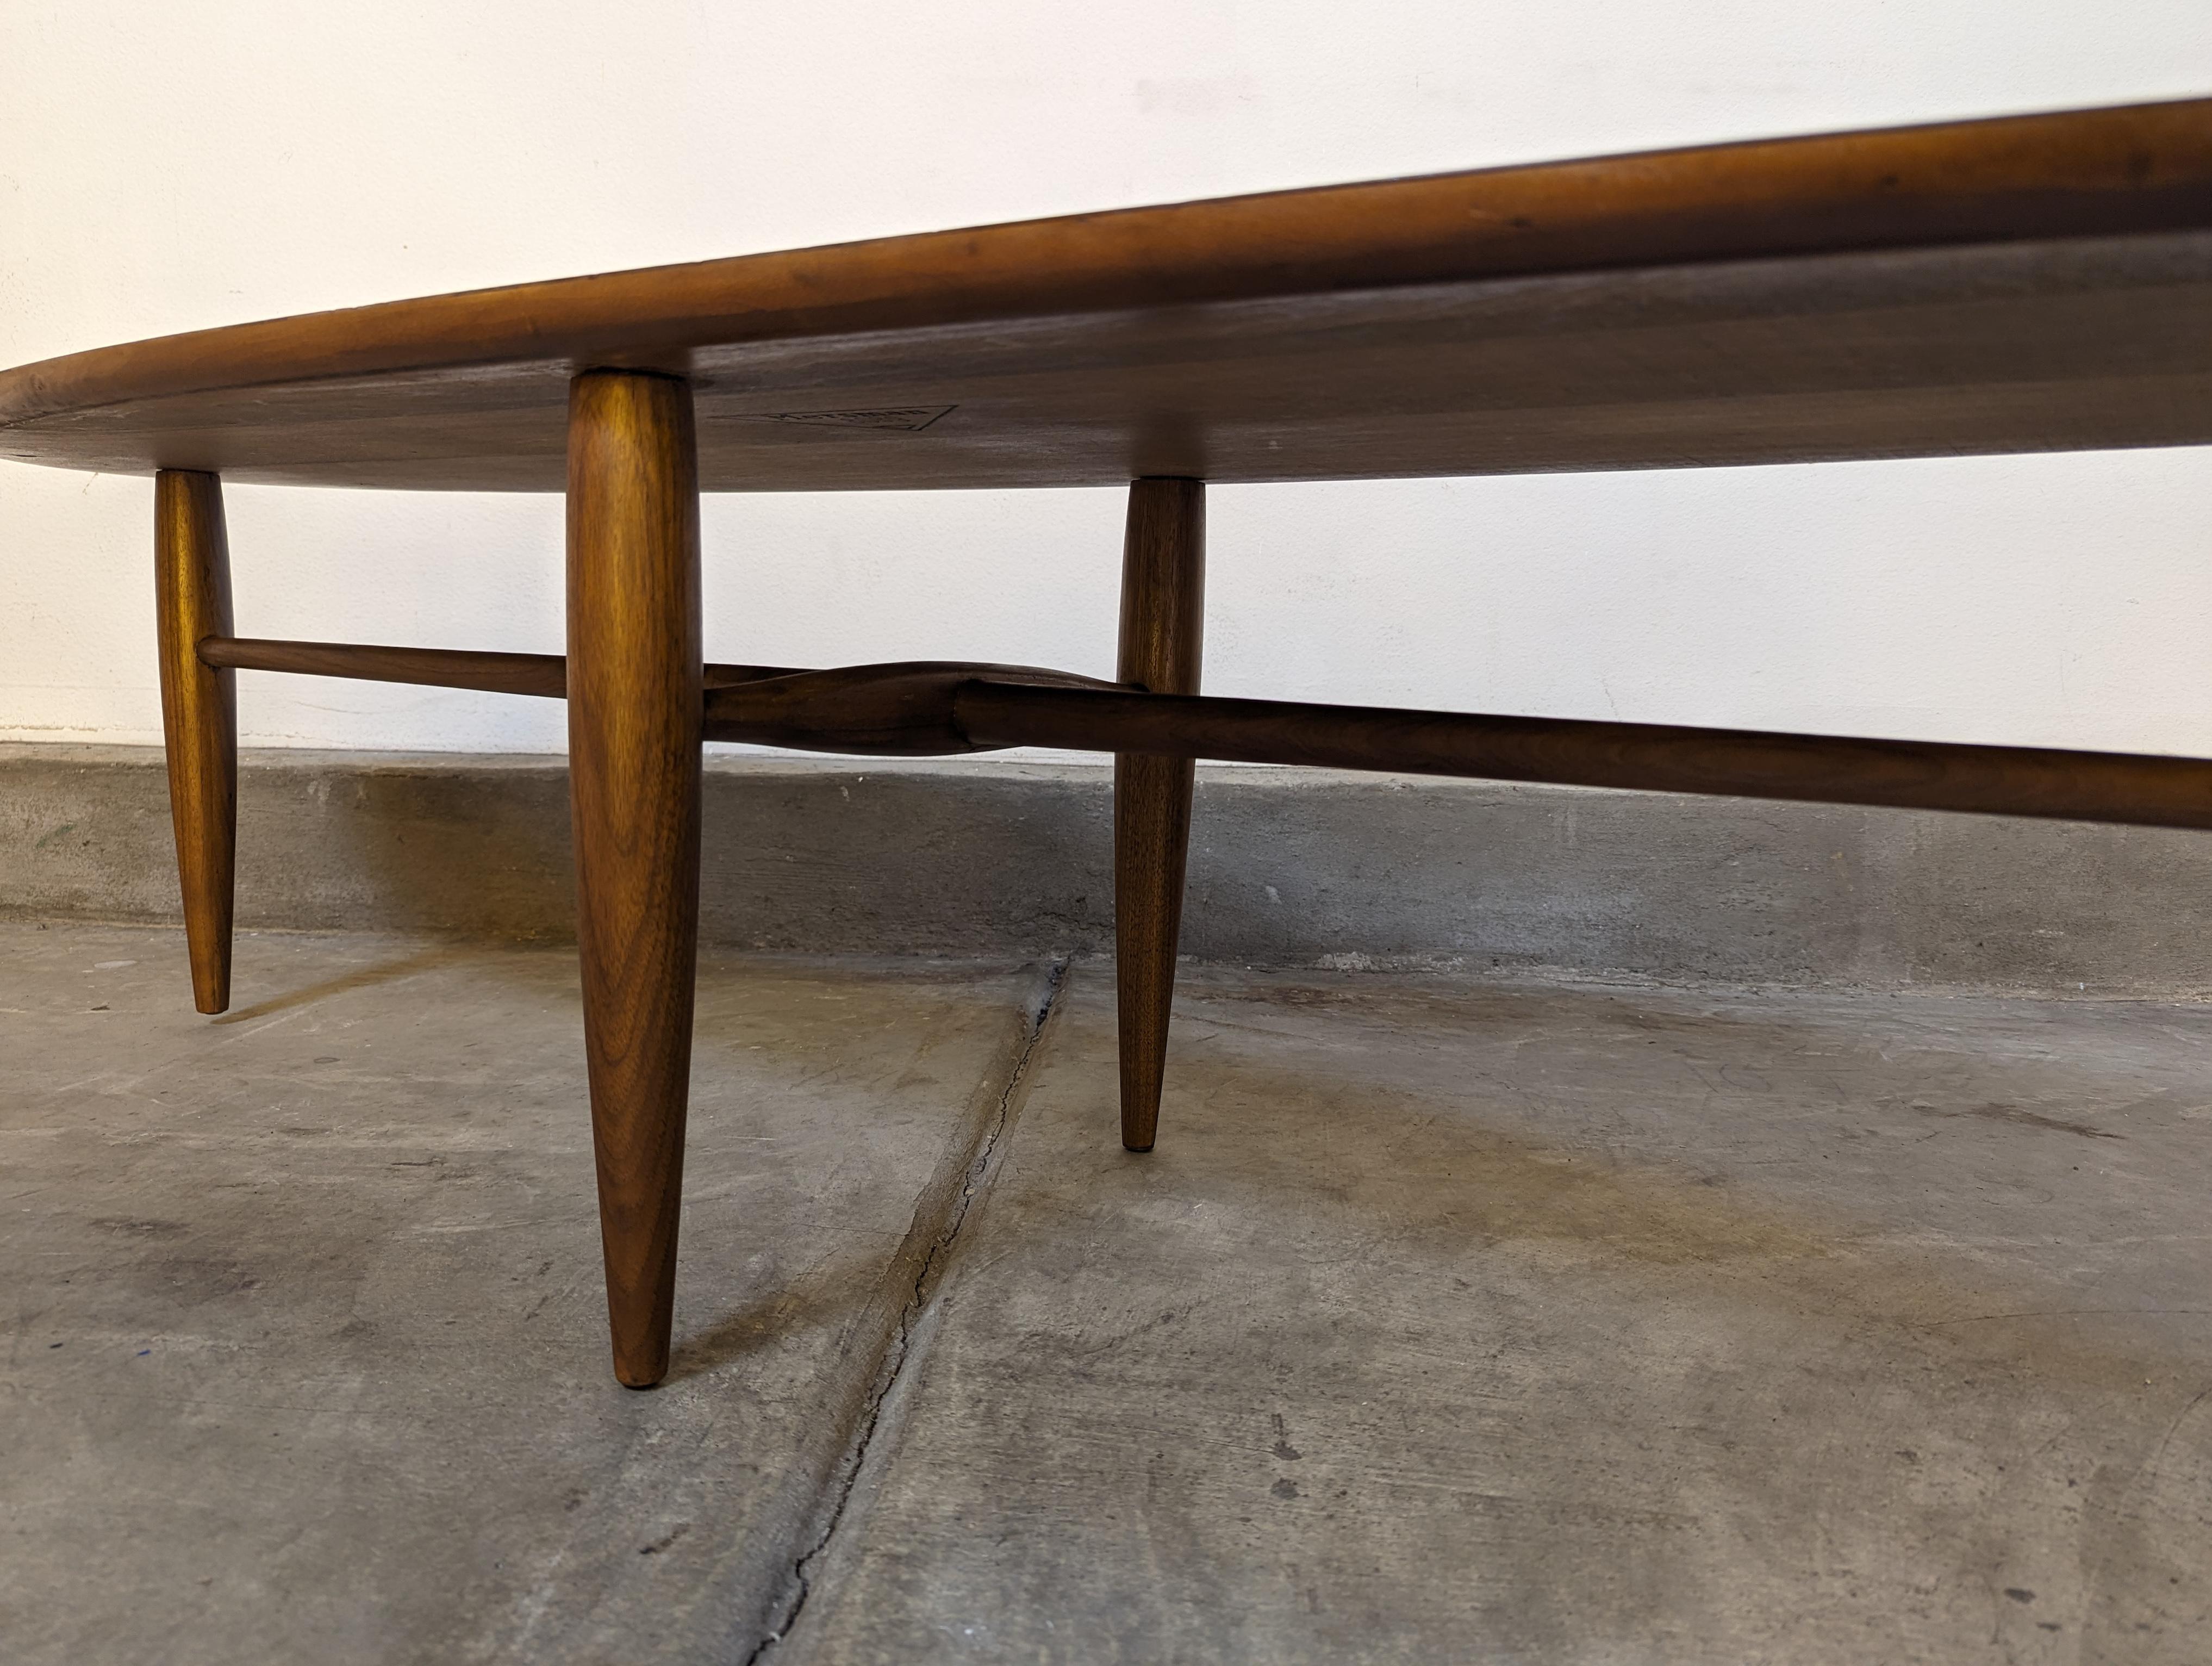 American Mid Century Modern Surfboard Coffee Table by Mersman, c1960s For Sale